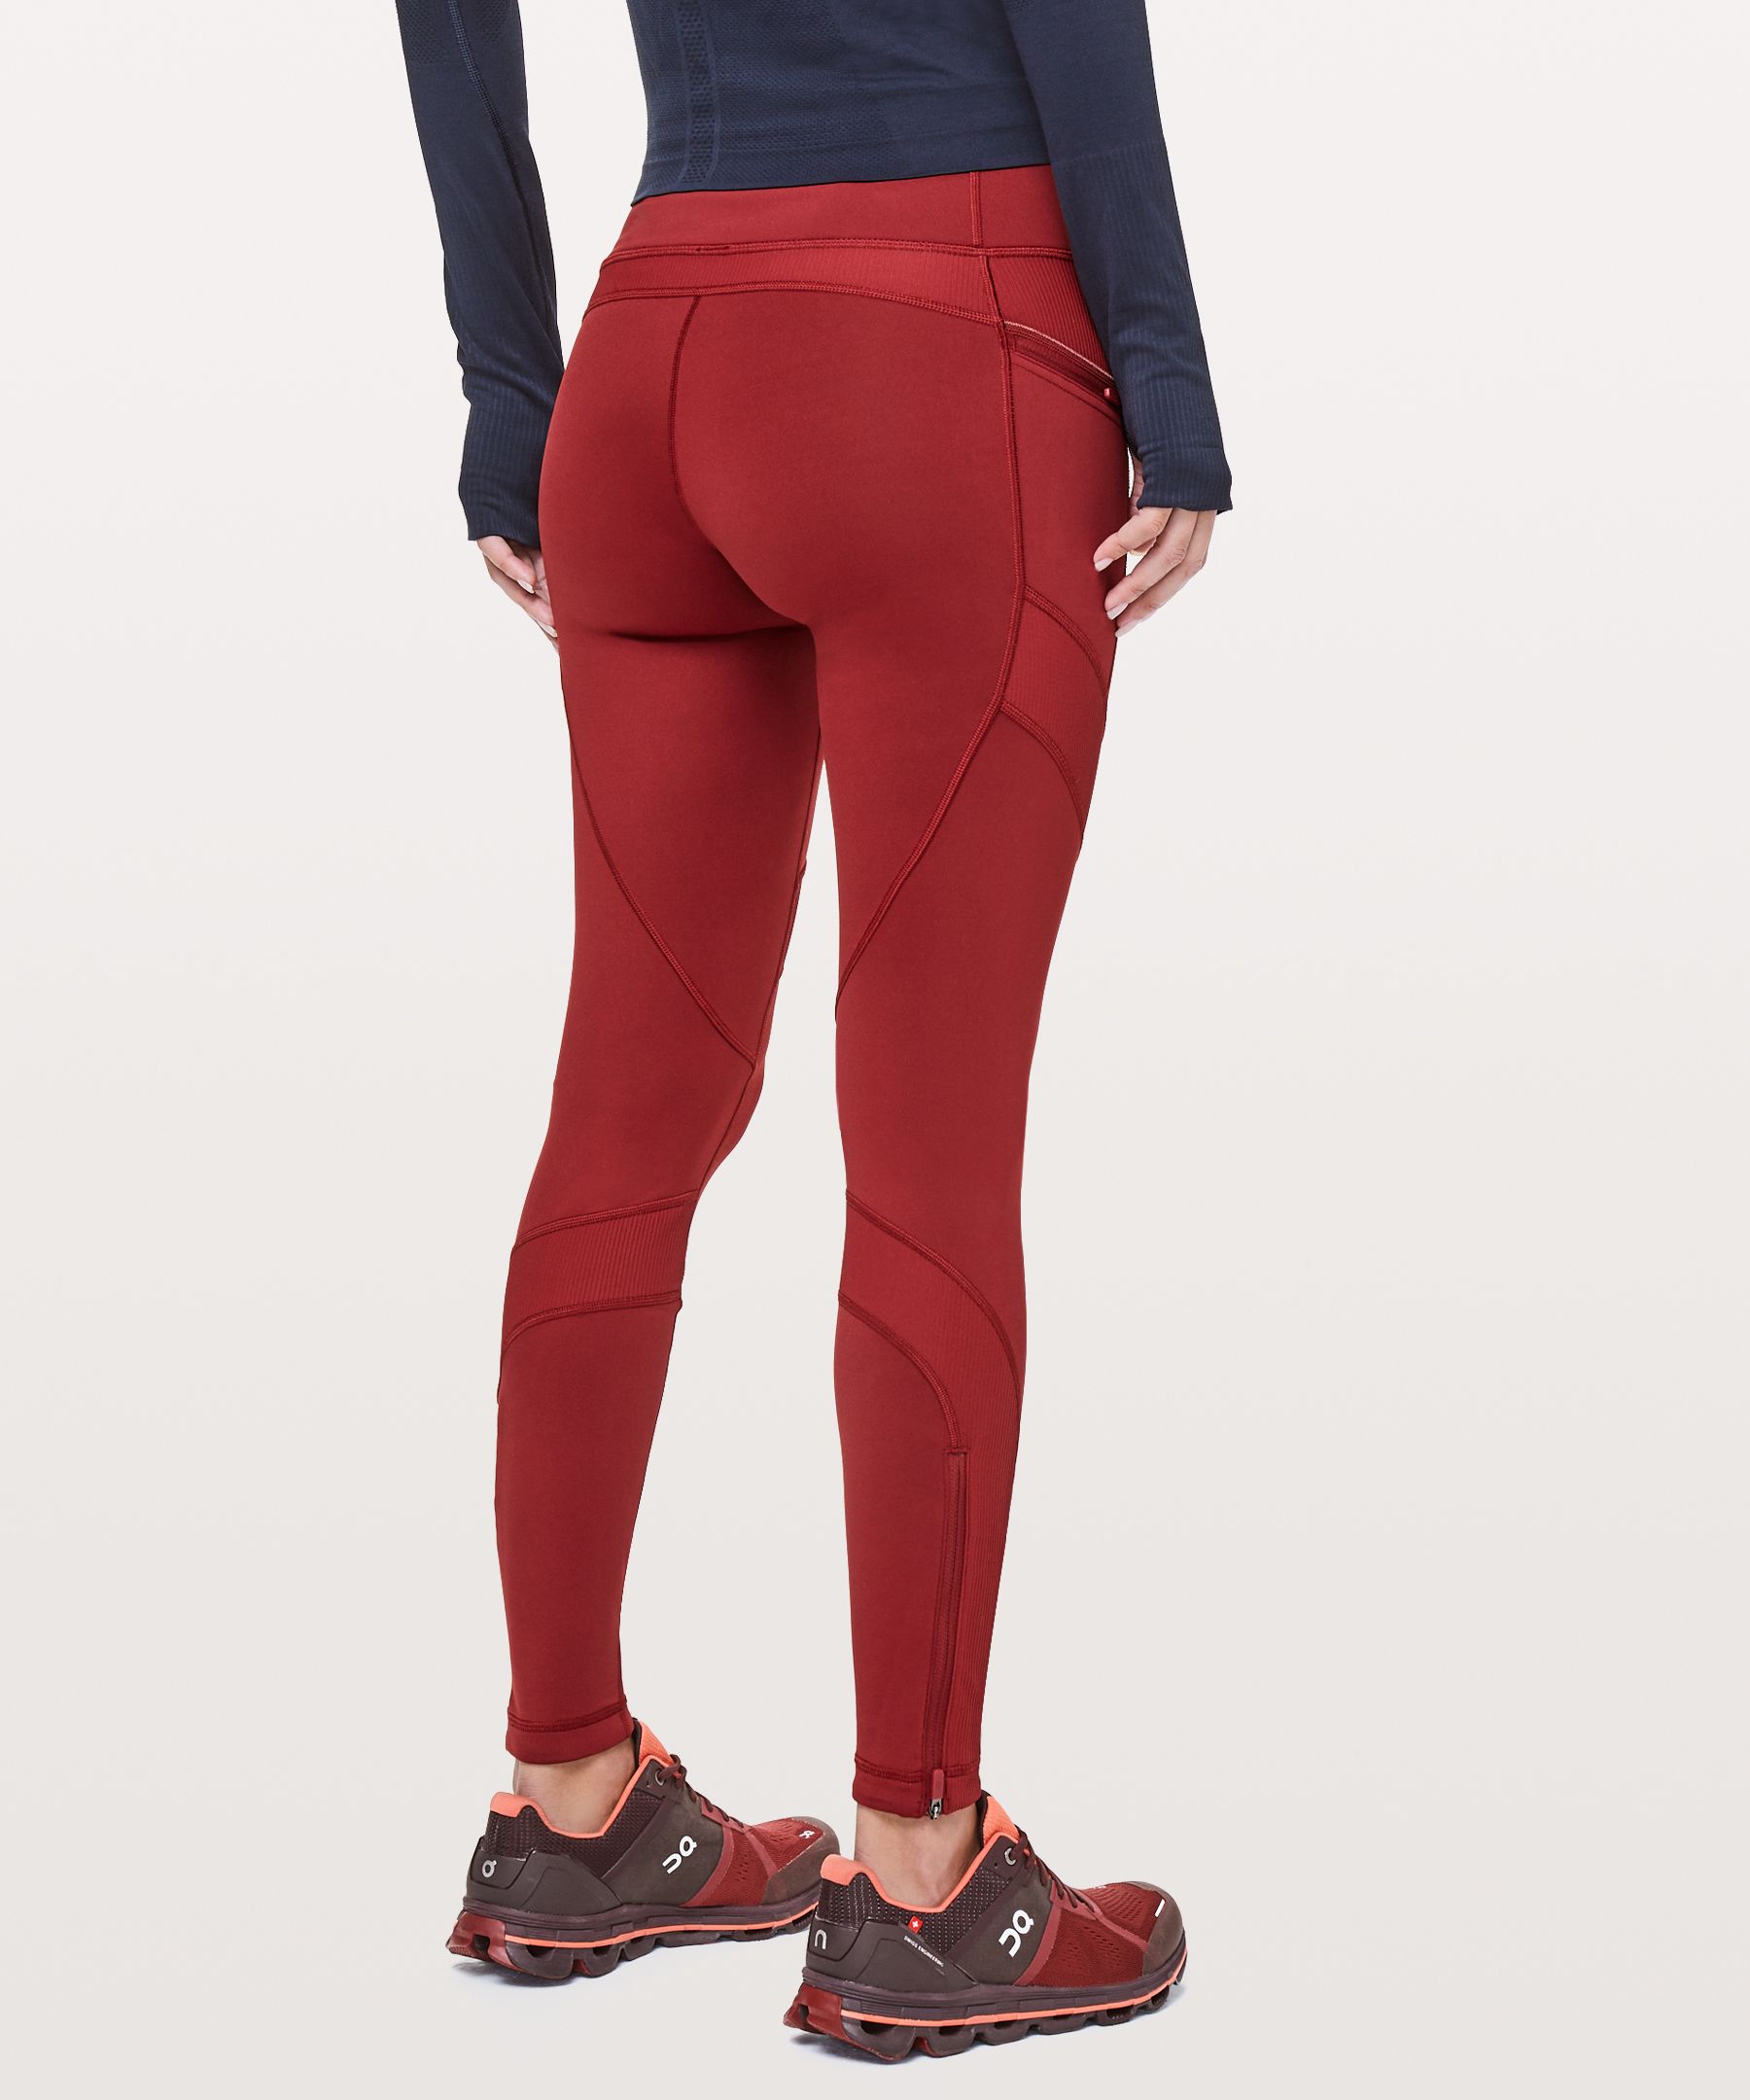 Does Lululemon Make Fleece-Lined Leggings? Find Out Now! - Playbite